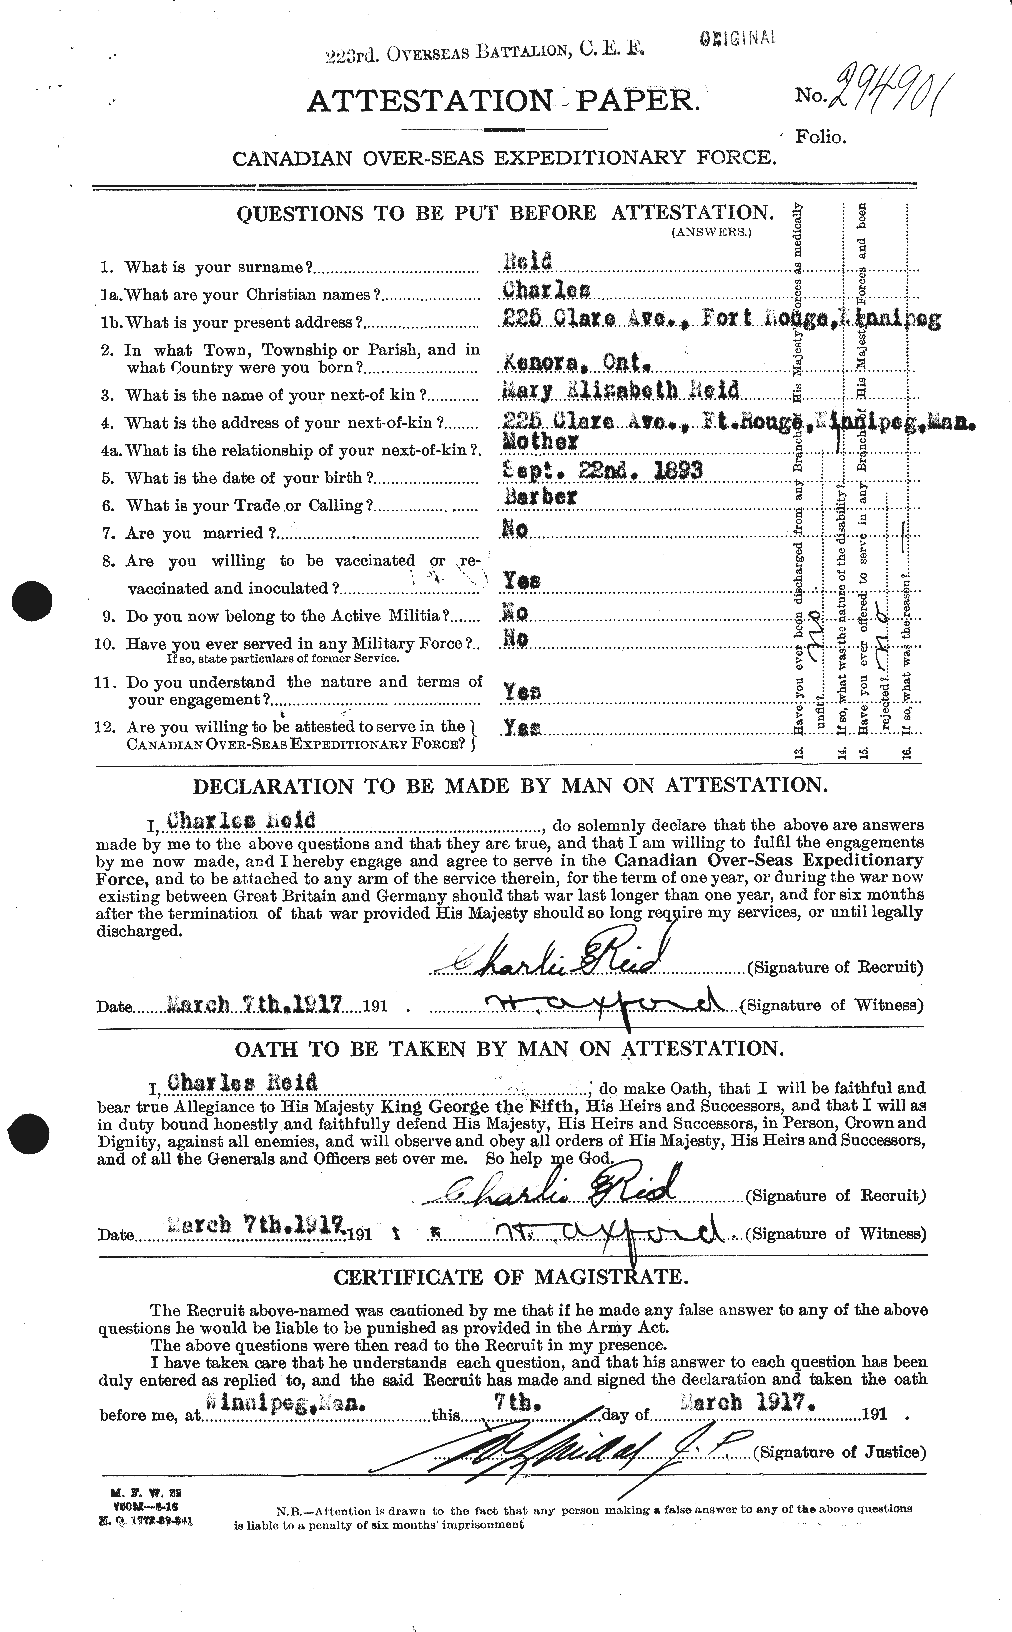 Personnel Records of the First World War - CEF 597877a